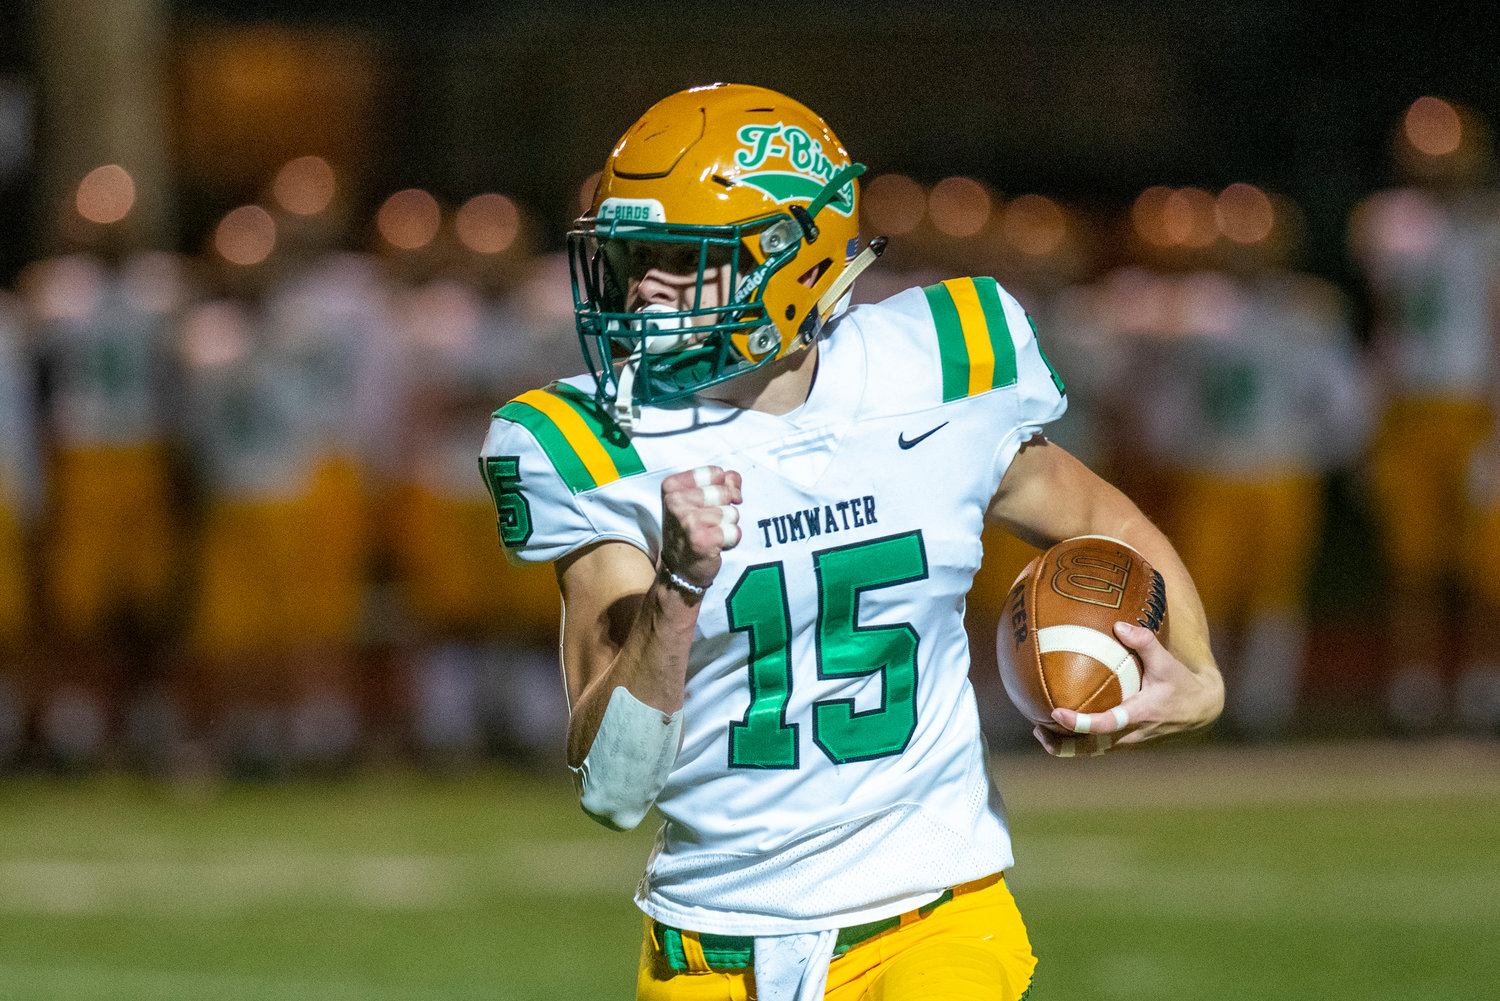 FILE PHOTO -- Tumwater’s Ashton Paine (15) rushes for a first-quarter touchdown against Centralia Oct. 29.